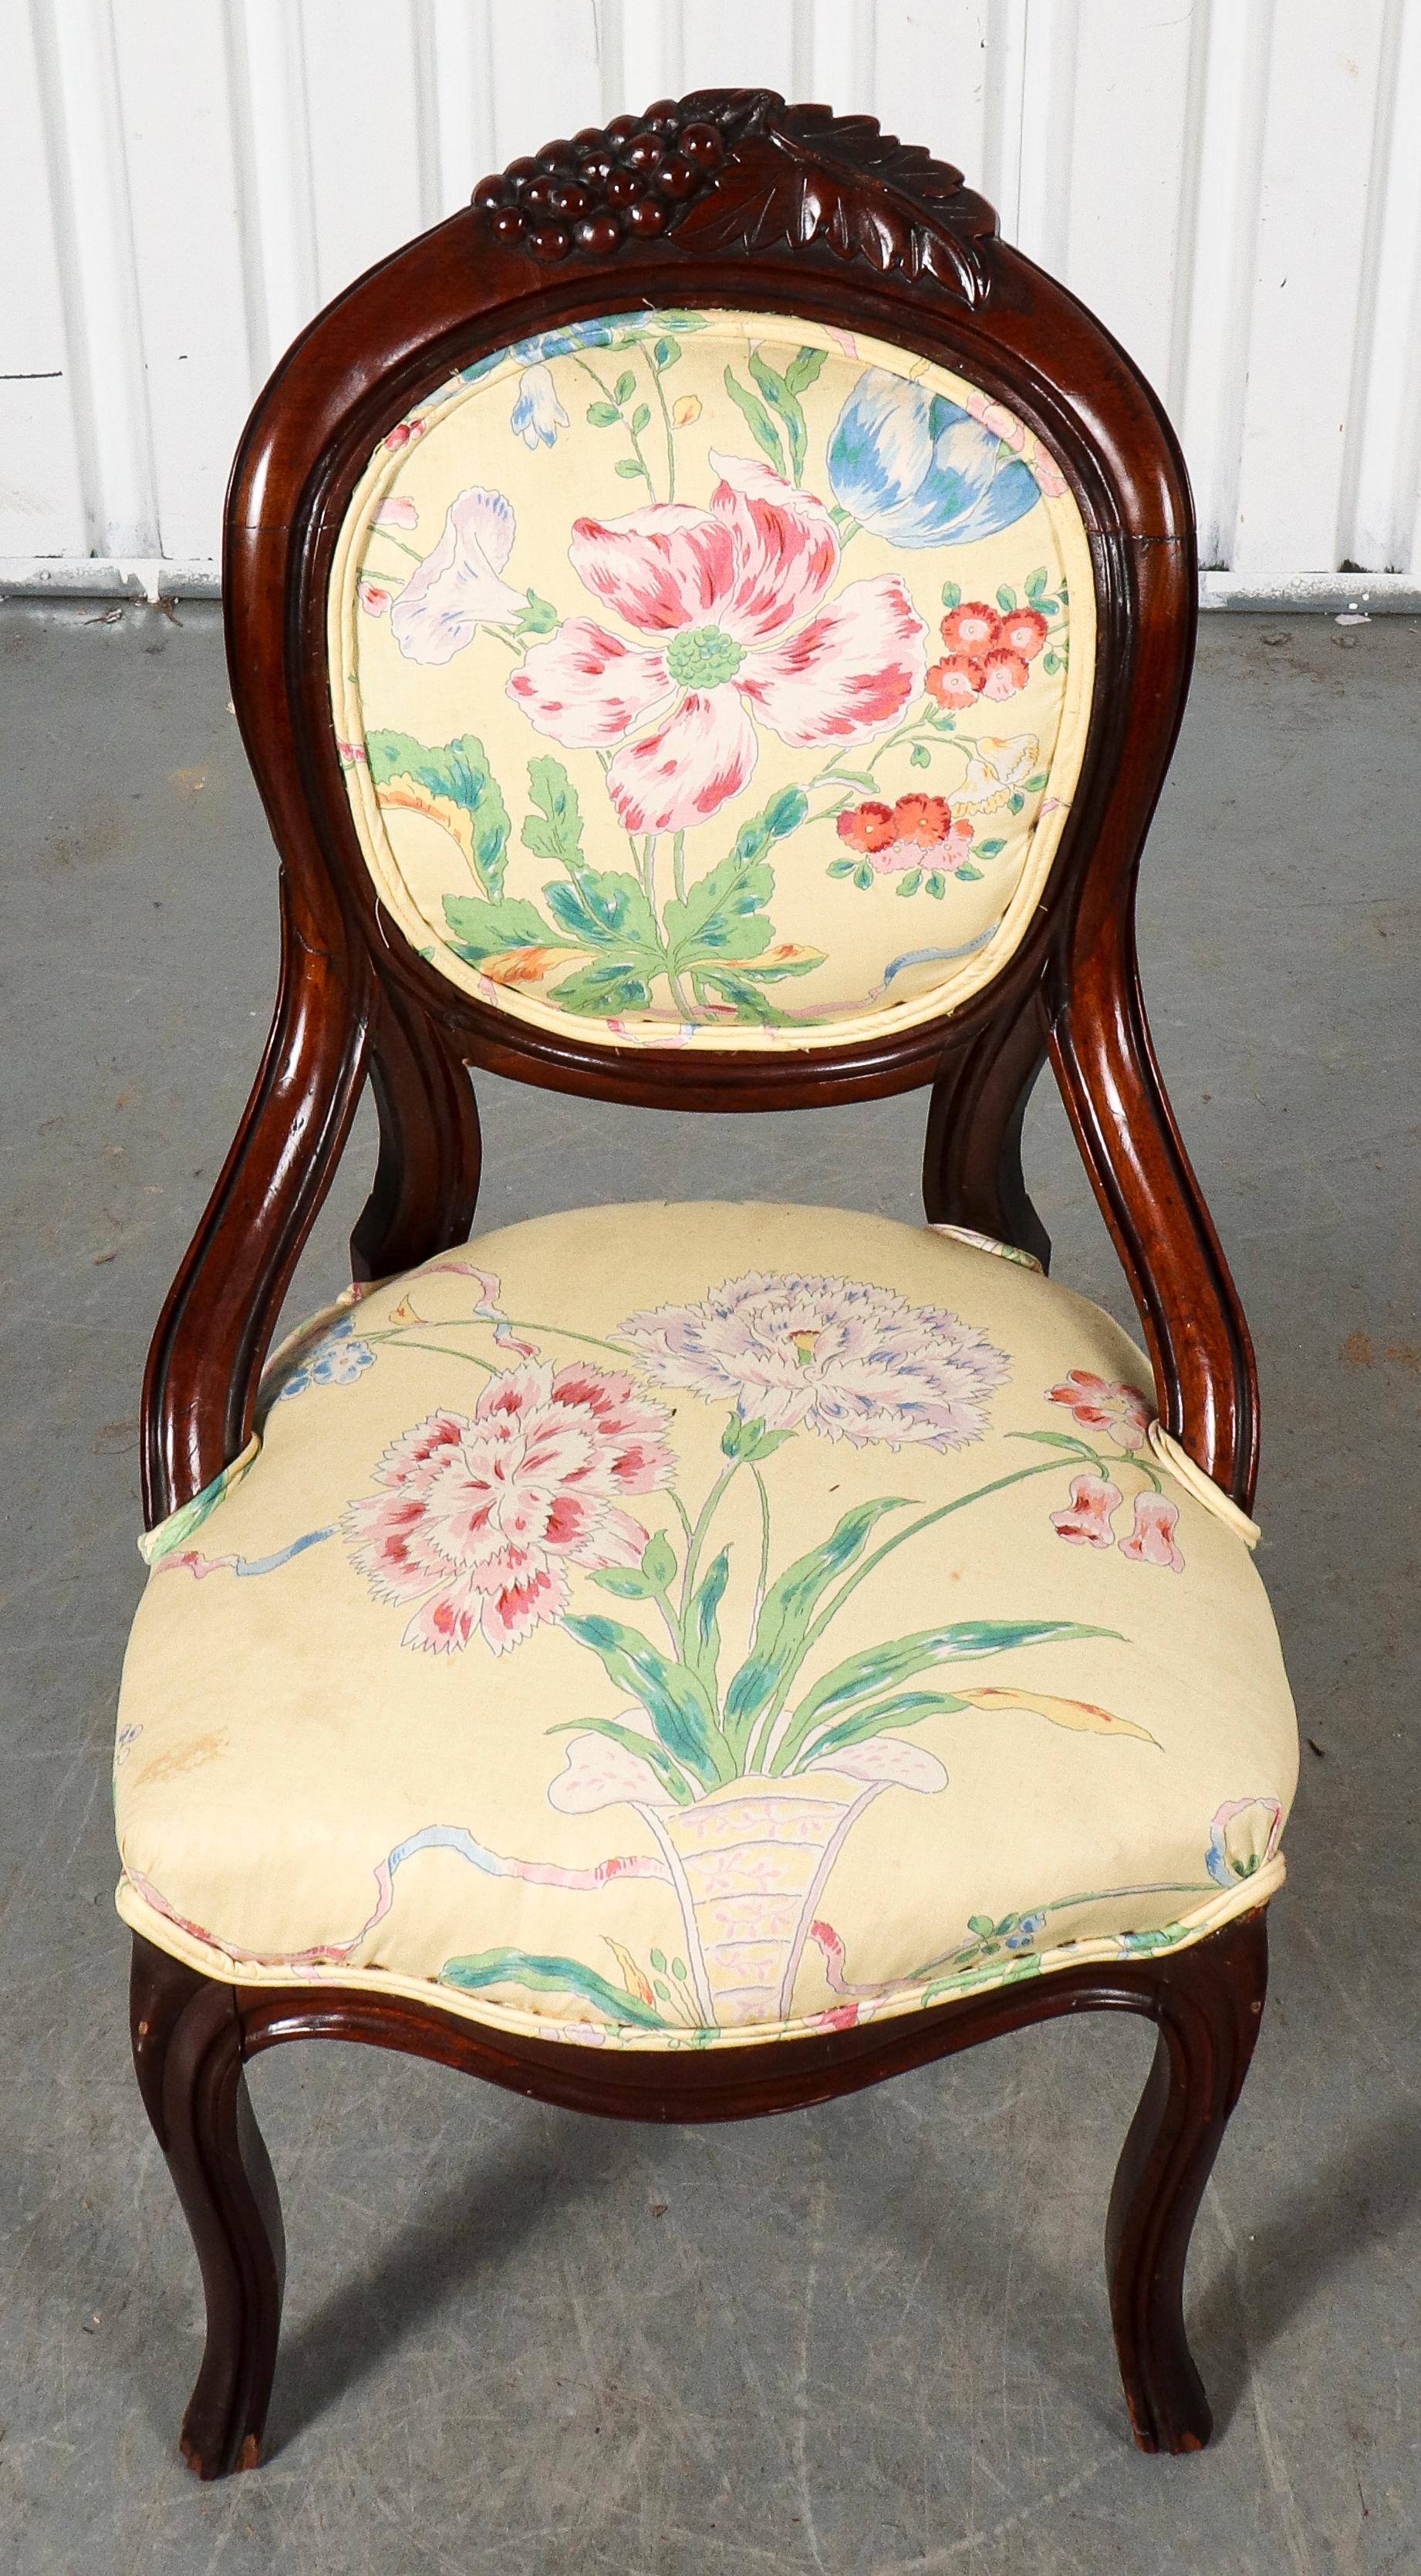 American Rococo Revival Style Wooden Chairs For Sale 6